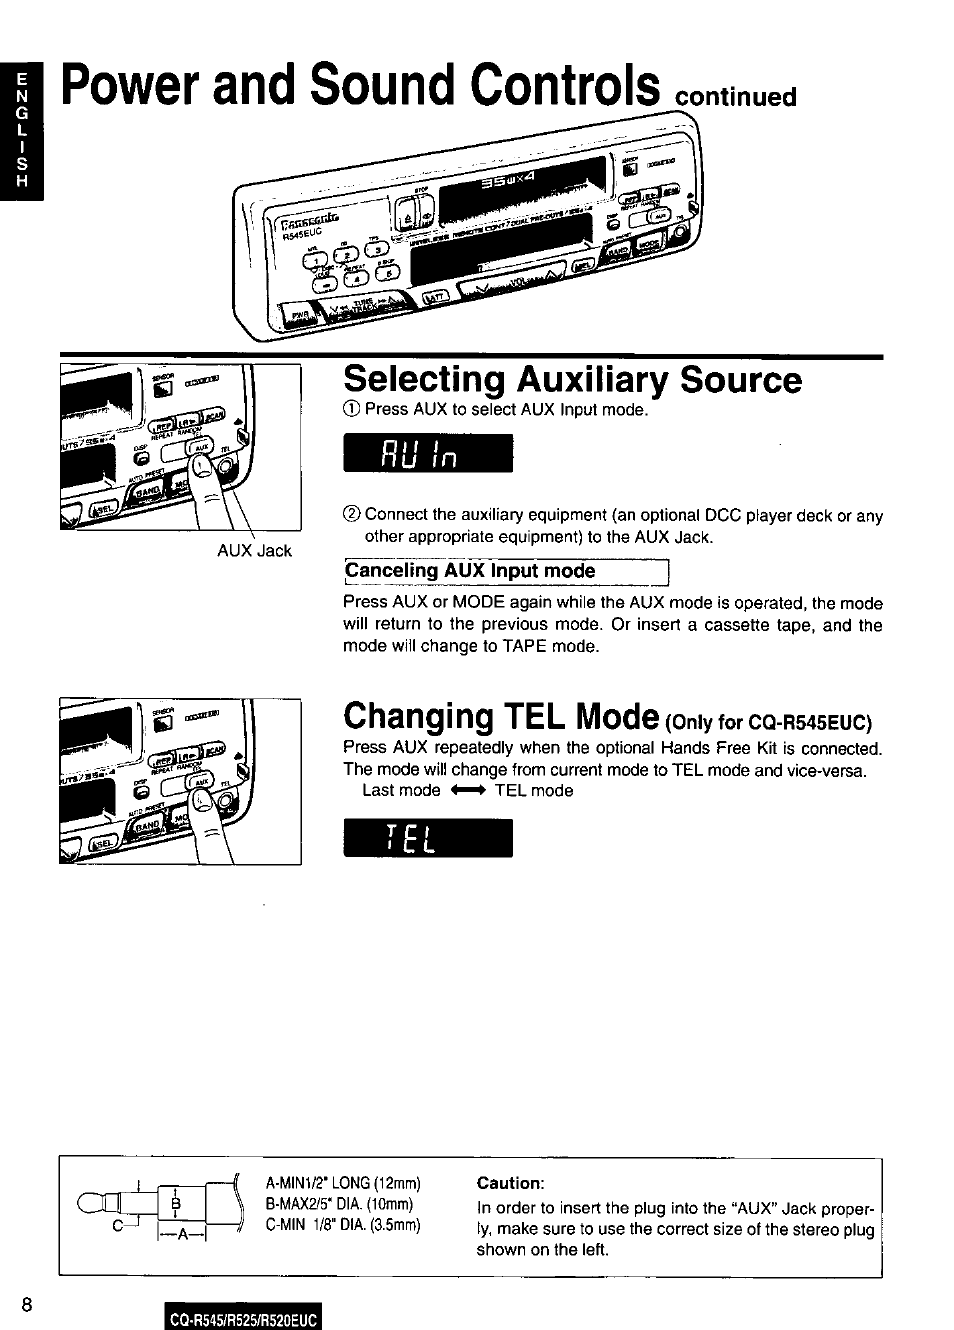 Power and sound controls, Selecting auxiliary source, Canceling aux input mode | Changing tel mode(omyforcq-r54seuc), Changing tel mode(omyfor, Seuc | Panasonic Cassette Receiver with CD Changer Control CQ-R545 Manuel d'utilisation | Page 8 / 56